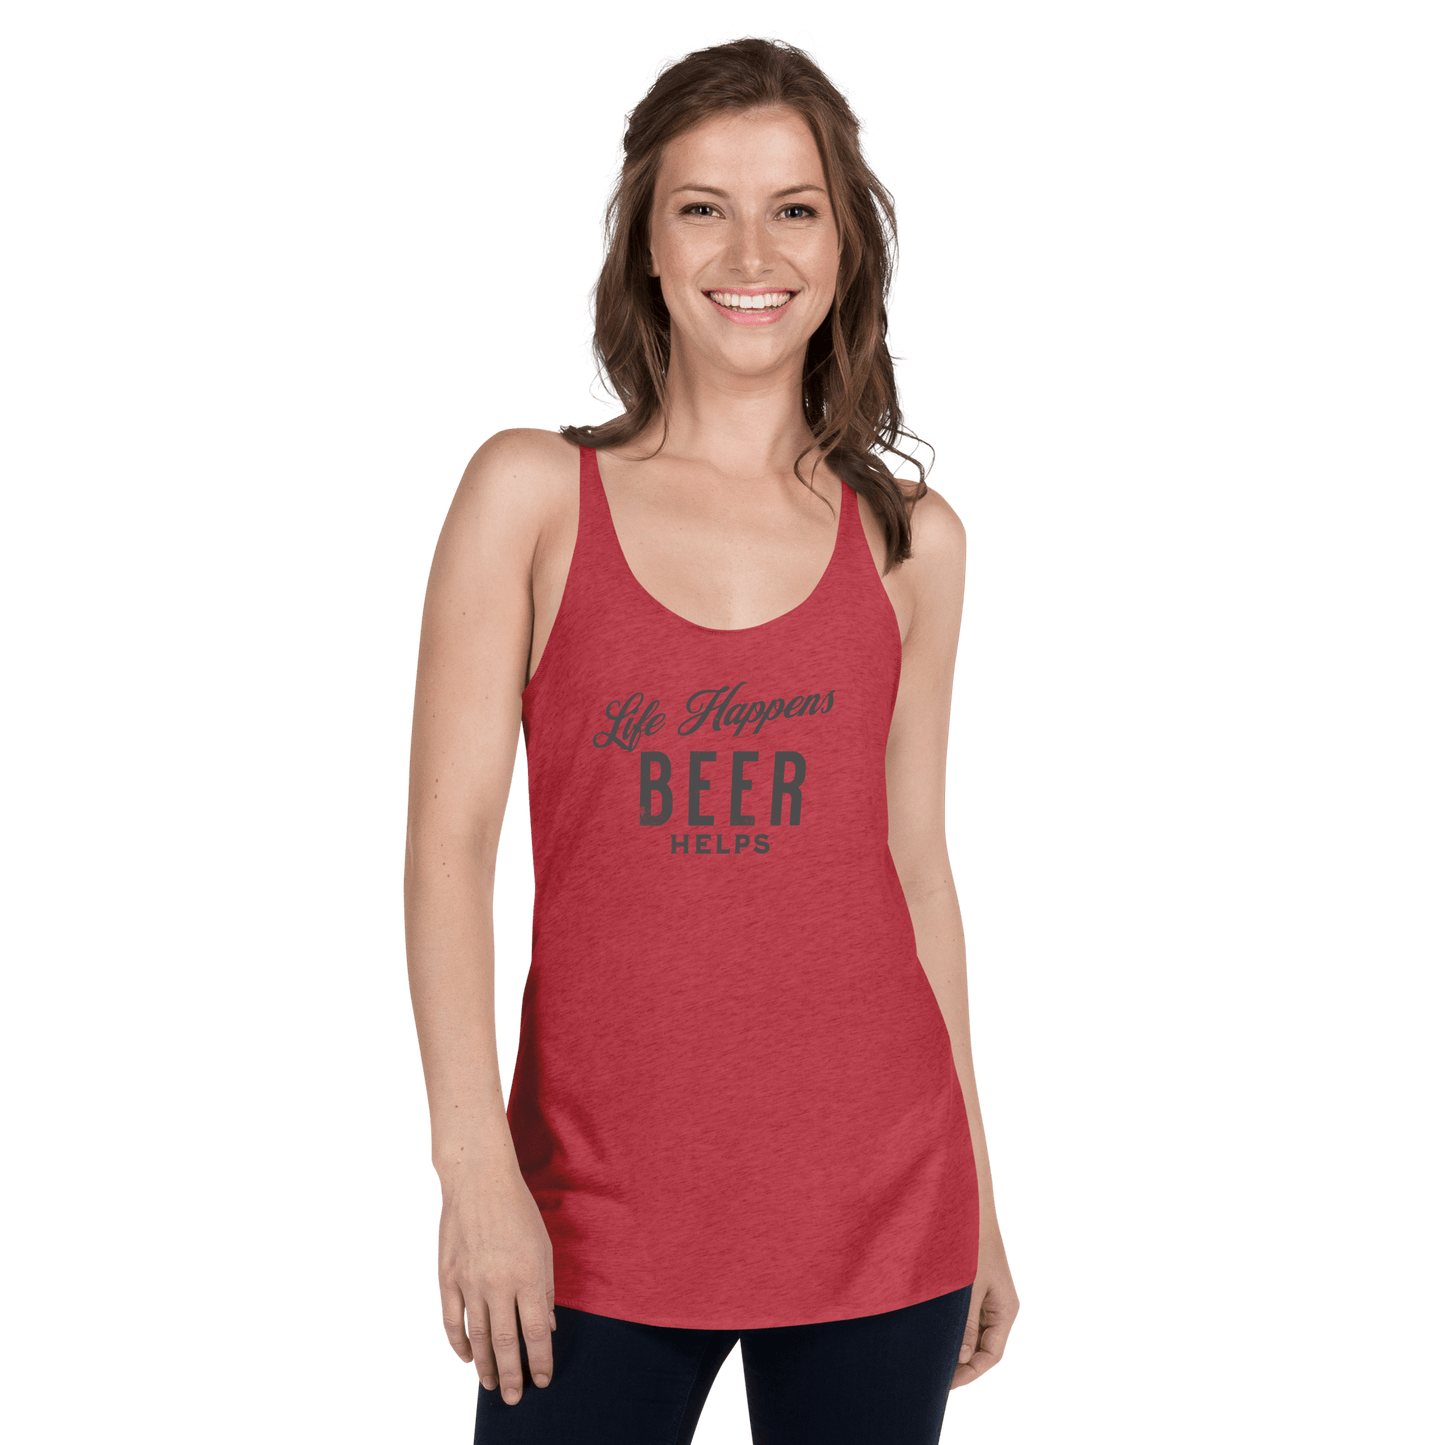 Life Happens Beer Helps Tank for Women | Comfy & Edgy BEER,DRINKING,New,RACERBACK TANK,WOMENS Dayzzed Apparel